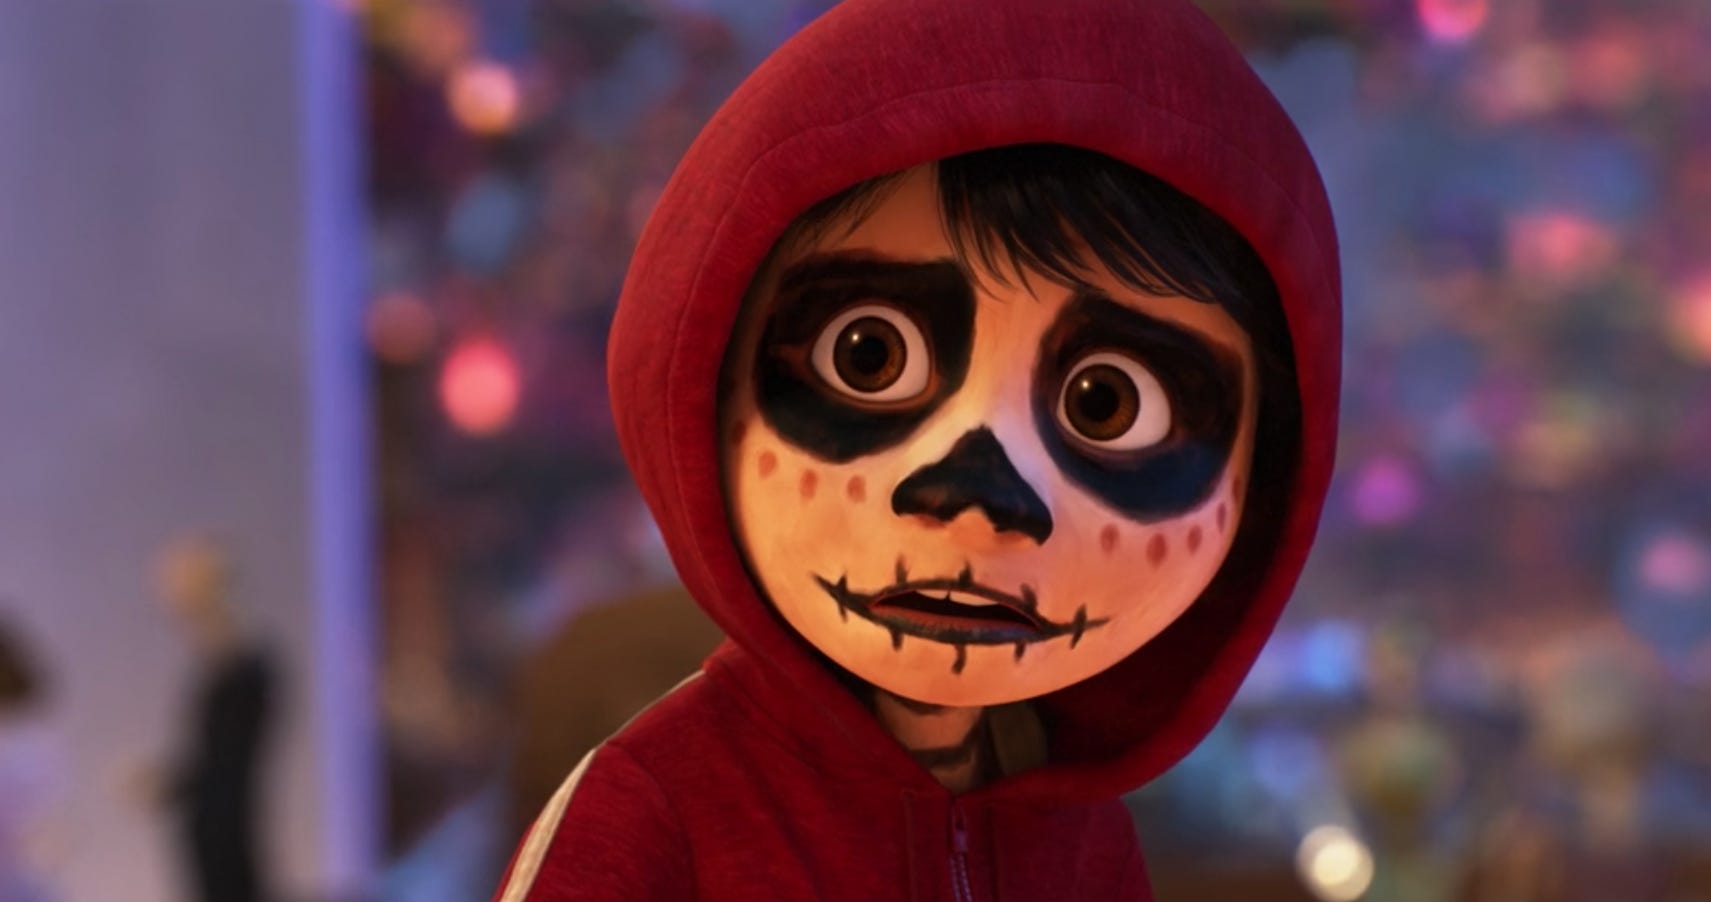 Hate your family? Try watching Pixar's 'Coco'